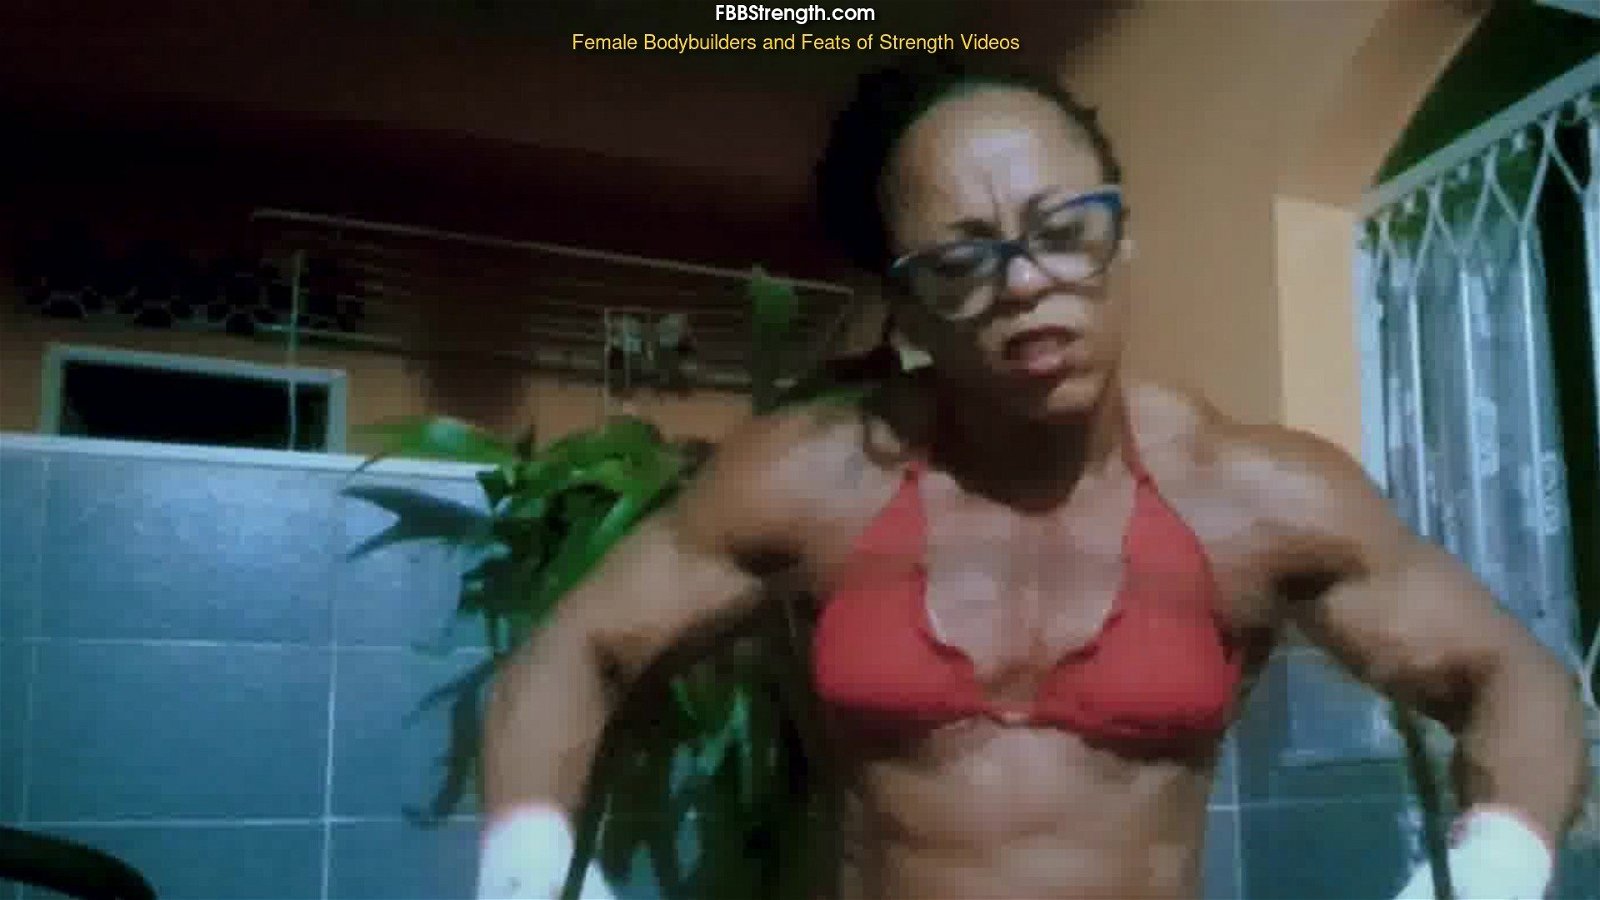 Photo by MusclegirlStrength with the username @MusclegirlStrength, who is a brand user,  April 6, 2024 at 1:09 AM and the text says 'Watch Marta Strong Crush Metal Rebars with Her Insane Strength!: fbbstrength.com

#musclegirl #musclegirllove #femalemuscle #femalemuscles #featsofstrength #StrongWomen #MusclePower #BarBendingQueens'